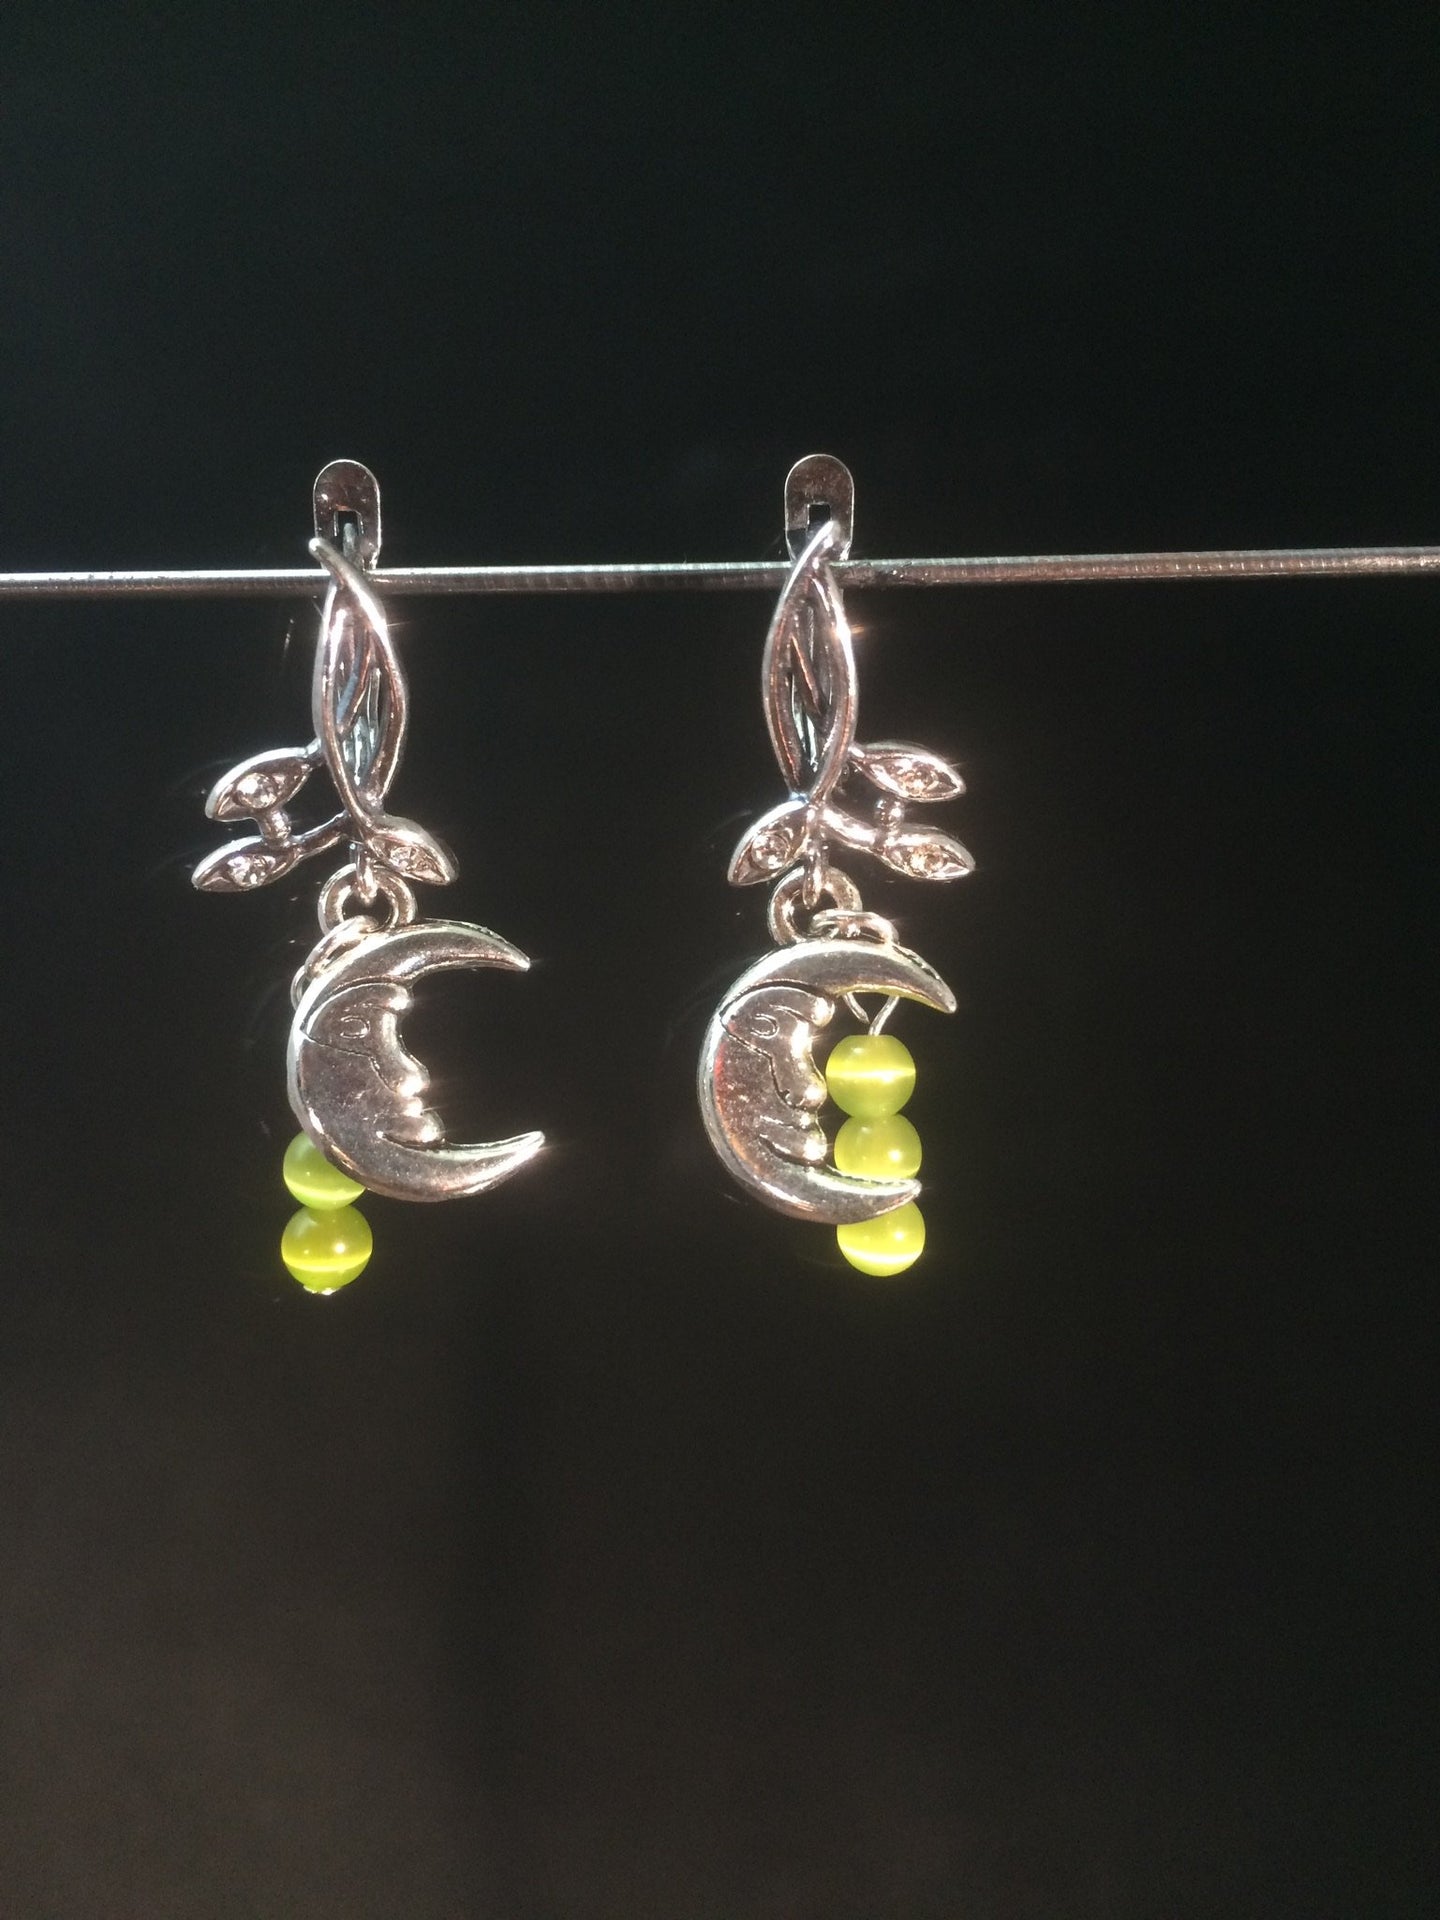 A silver plated moon charm is adorned with natural peridot beads, then set on silver plated brass leverbacks. These earrings form a matching set with necklace 1NCK0053.